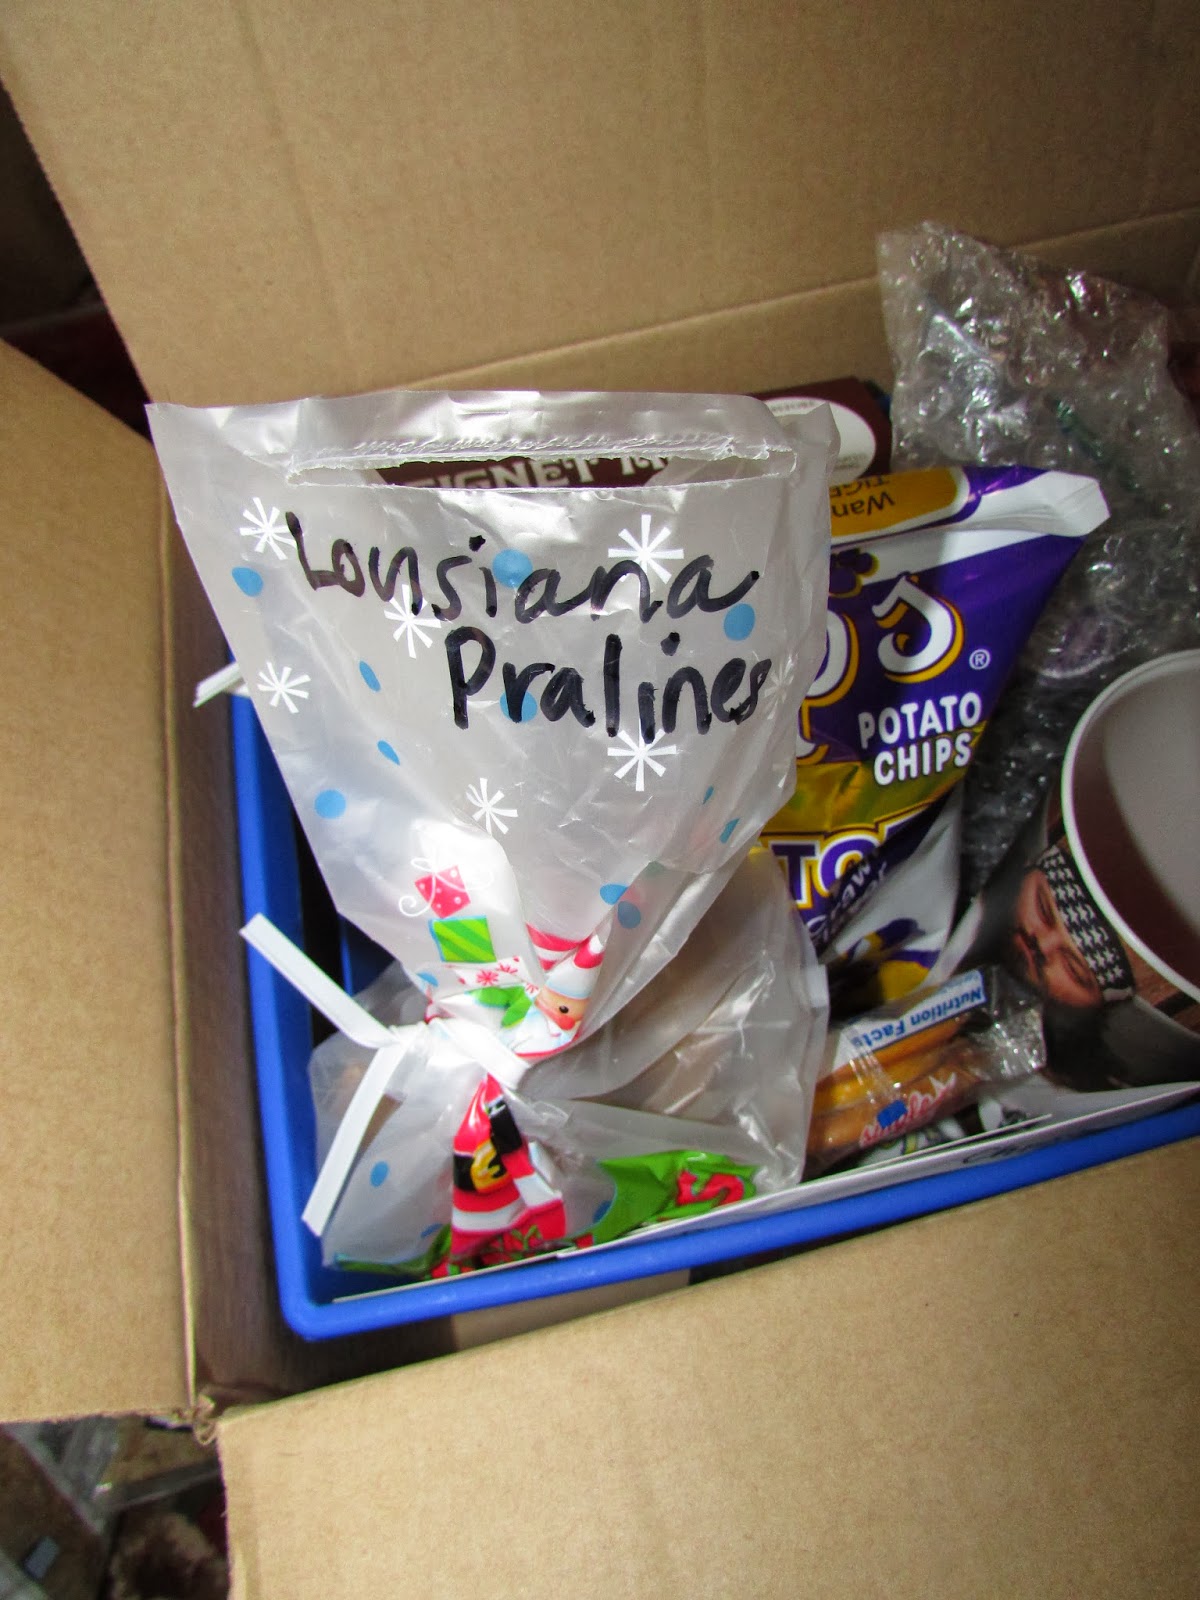 For the Love of Food: Creative Gift Ideas: Louisiana State Gift Basket